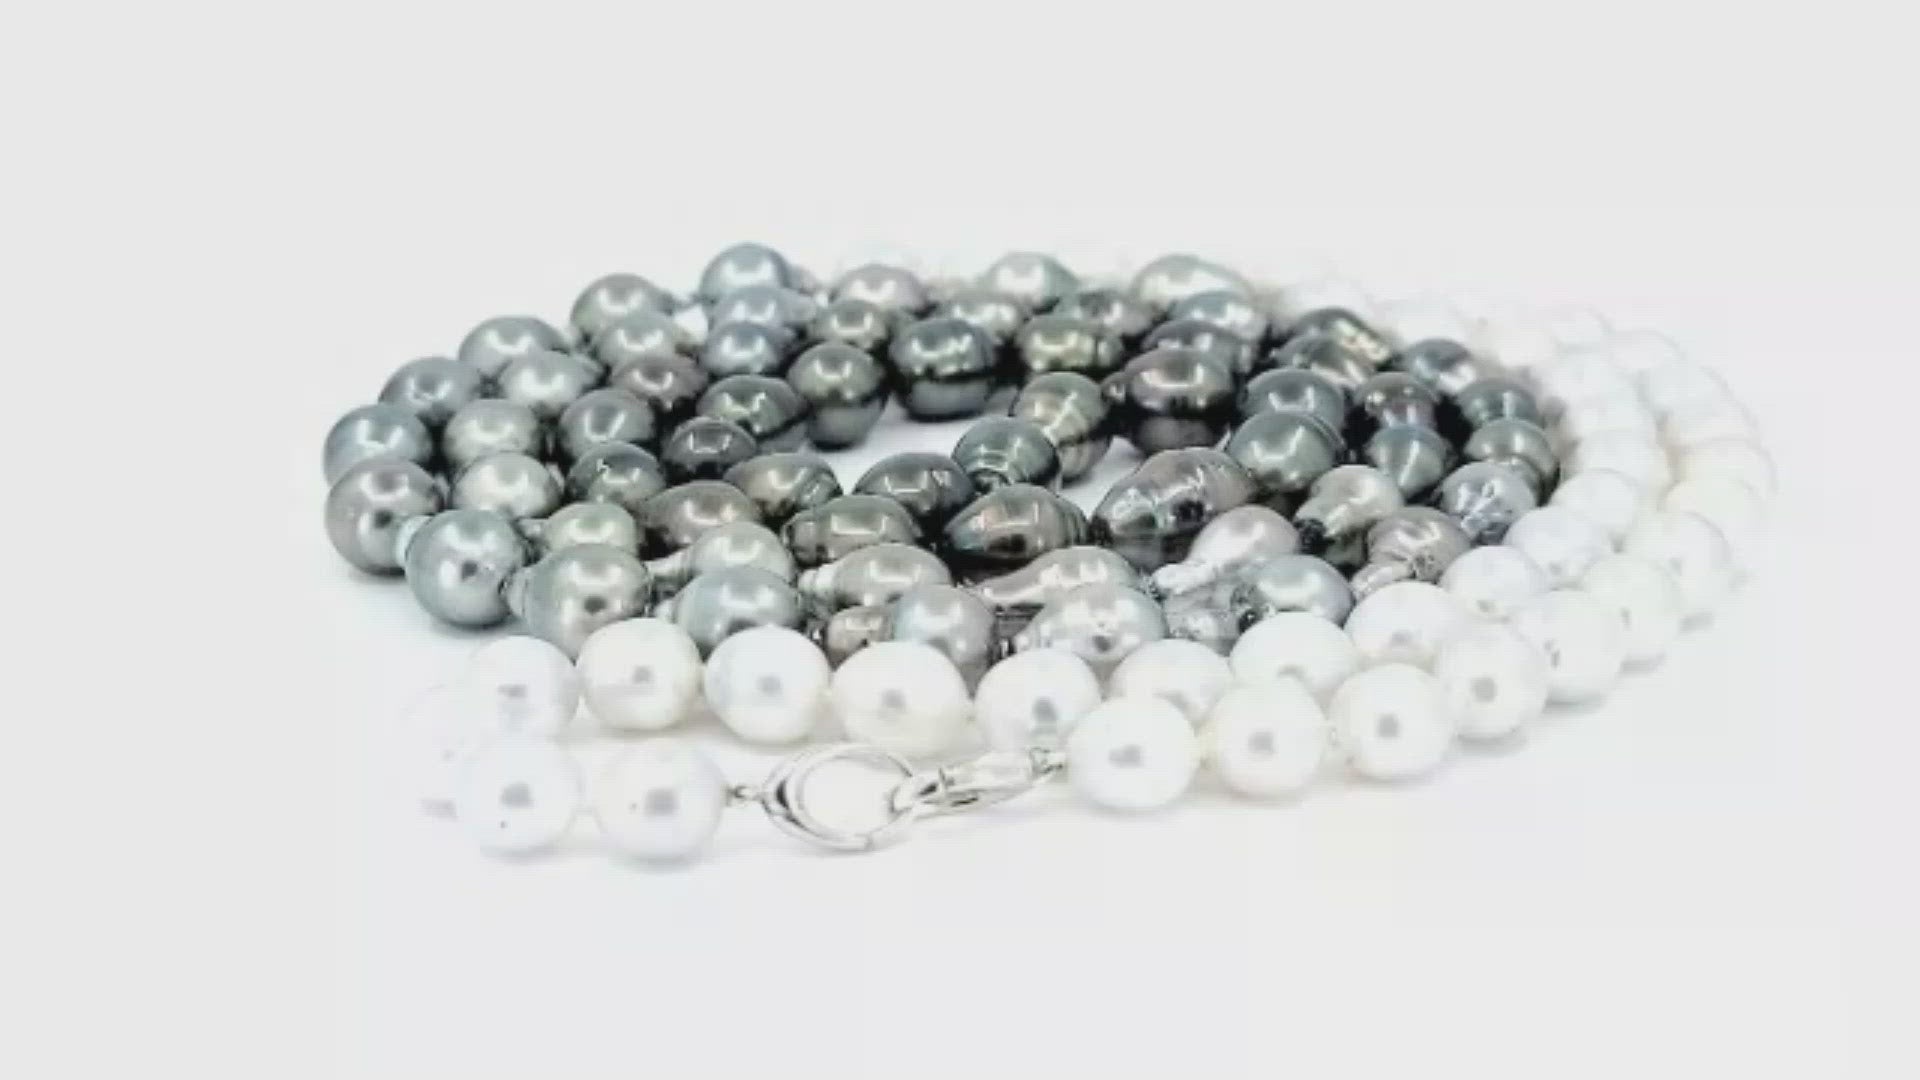 South Sea Tahitian Pearl Necklace